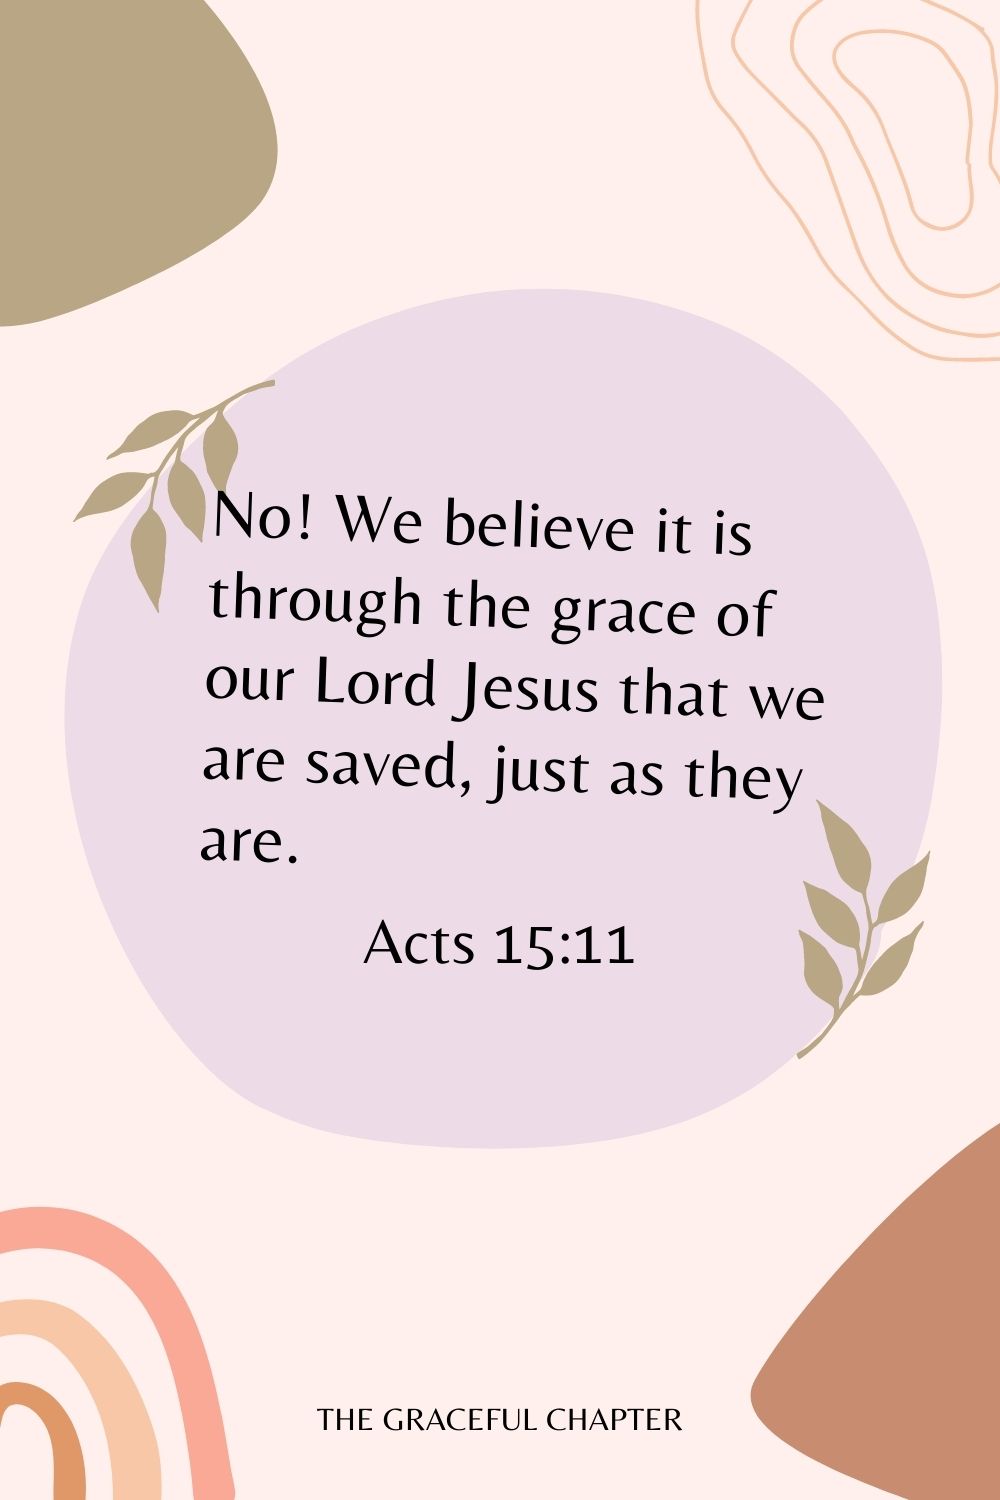 No! We believe it is through the grace of our Lord Jesus that we are saved, just as they are. Acts 15:11